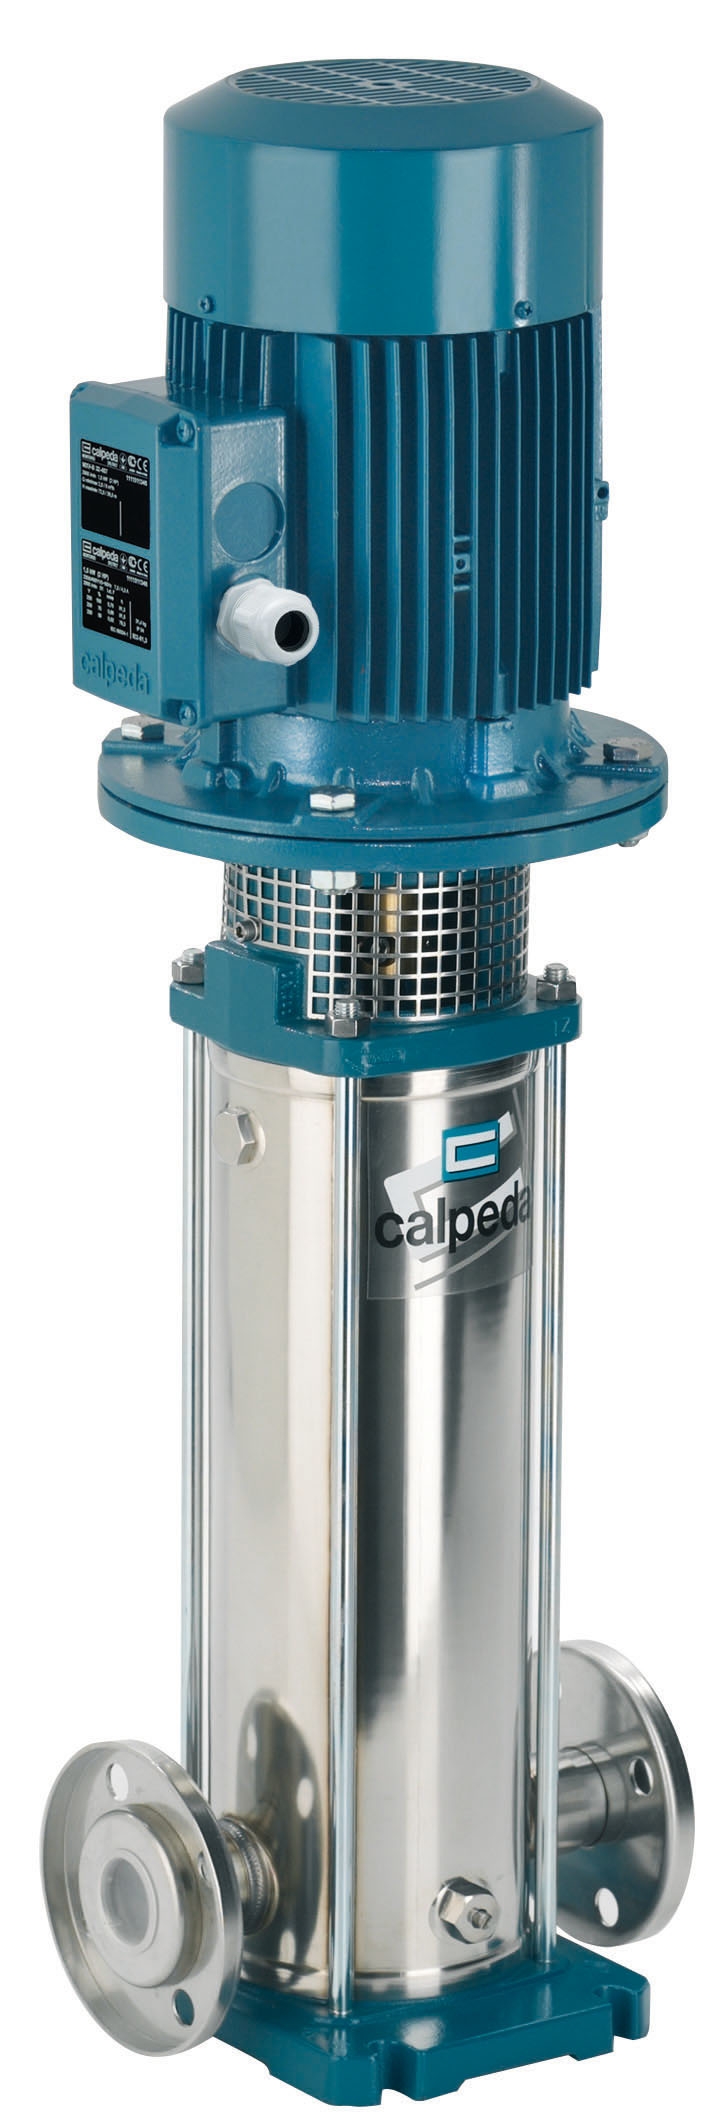 Calpeda MXVL Vertical Multistage Pumps (1 Phase)